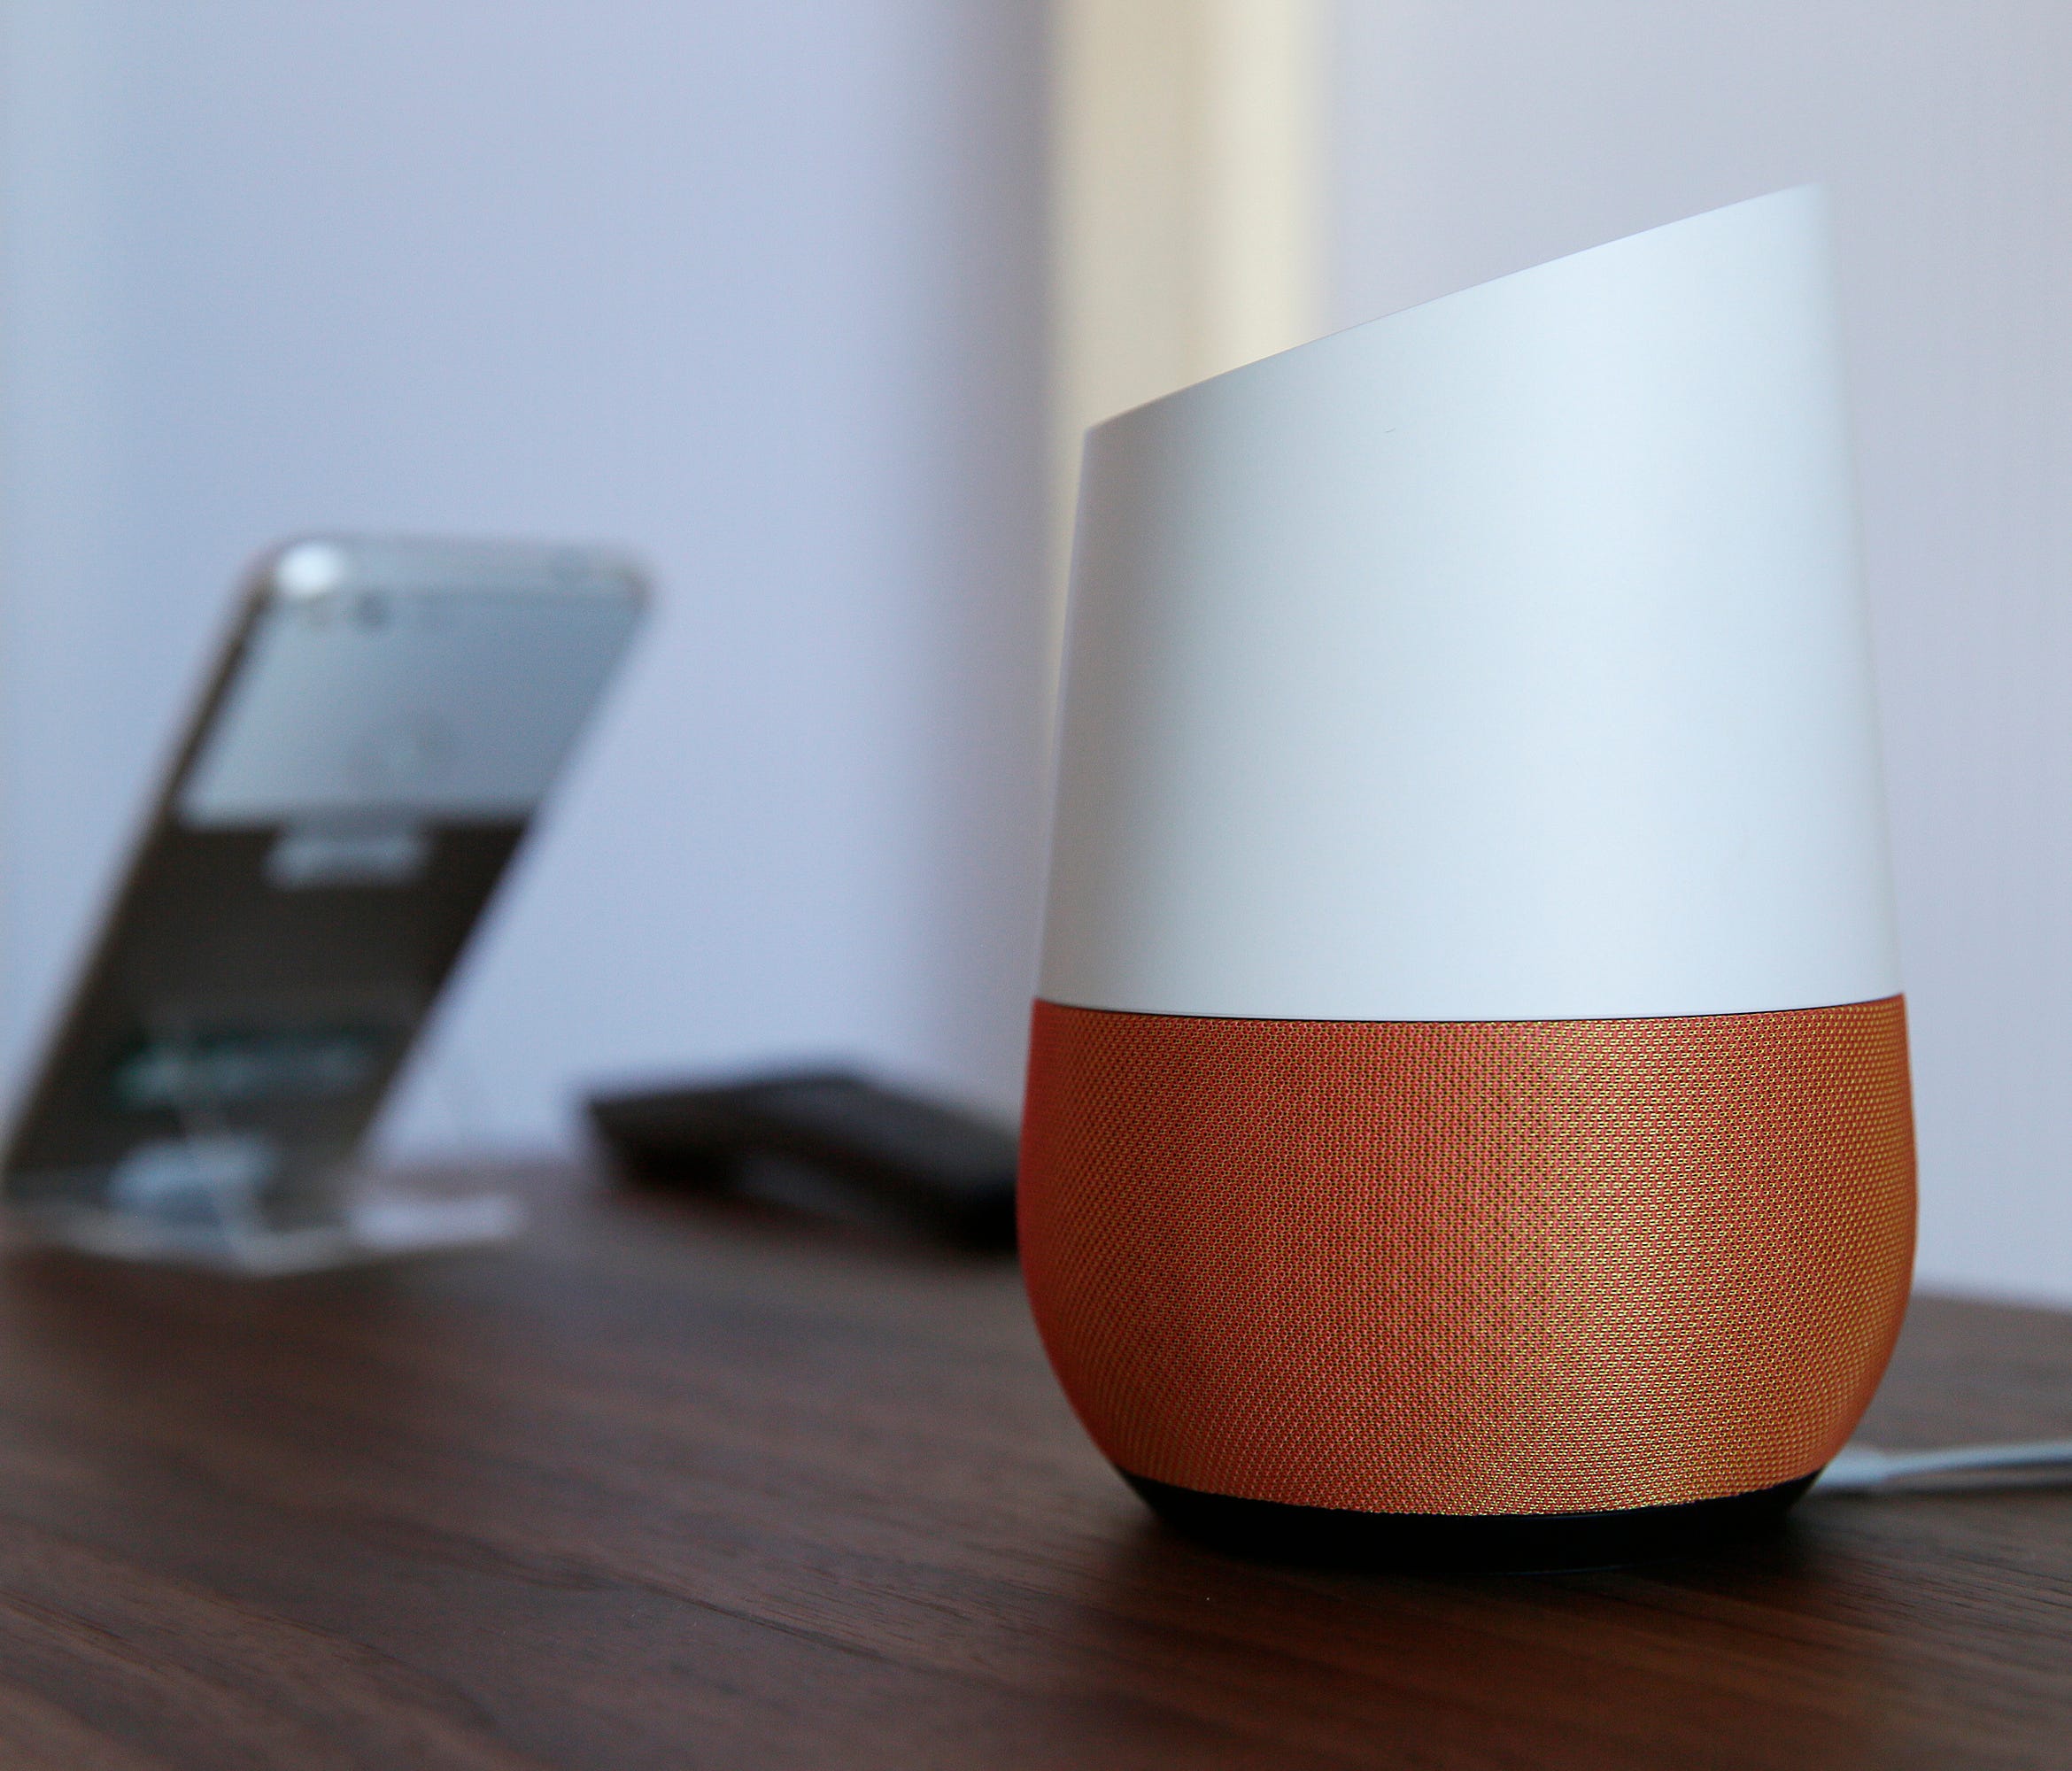 Google Home is Google's voice-activated speaker.